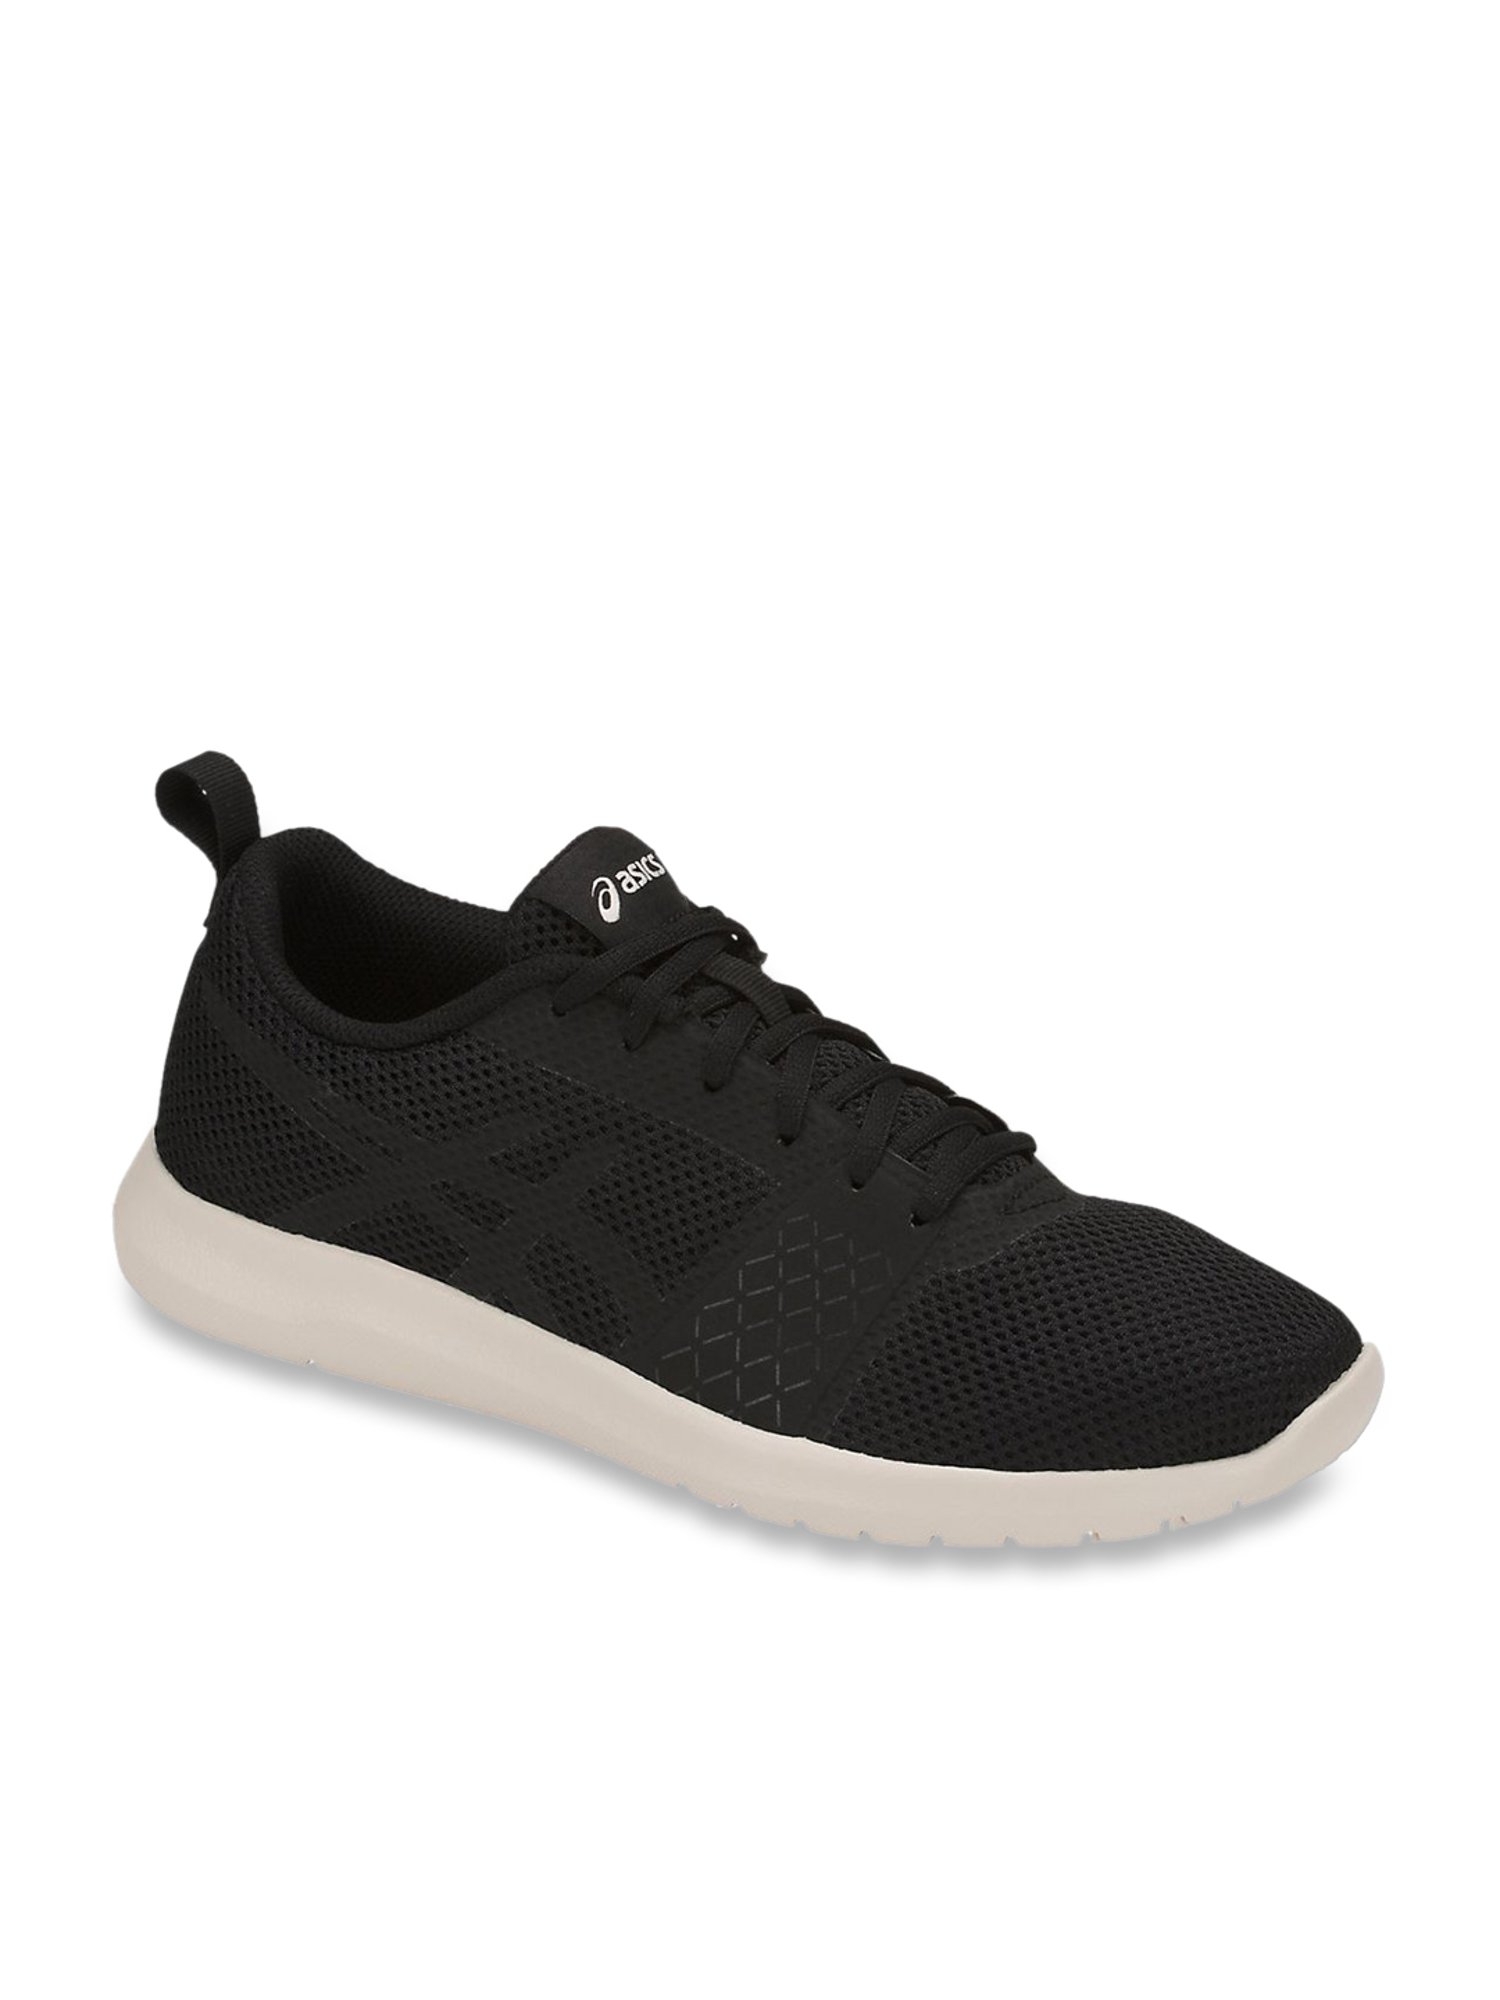 Buy Asics Women's Kanmei Mx Black Casual Sneakers for Women at Price CLiQ